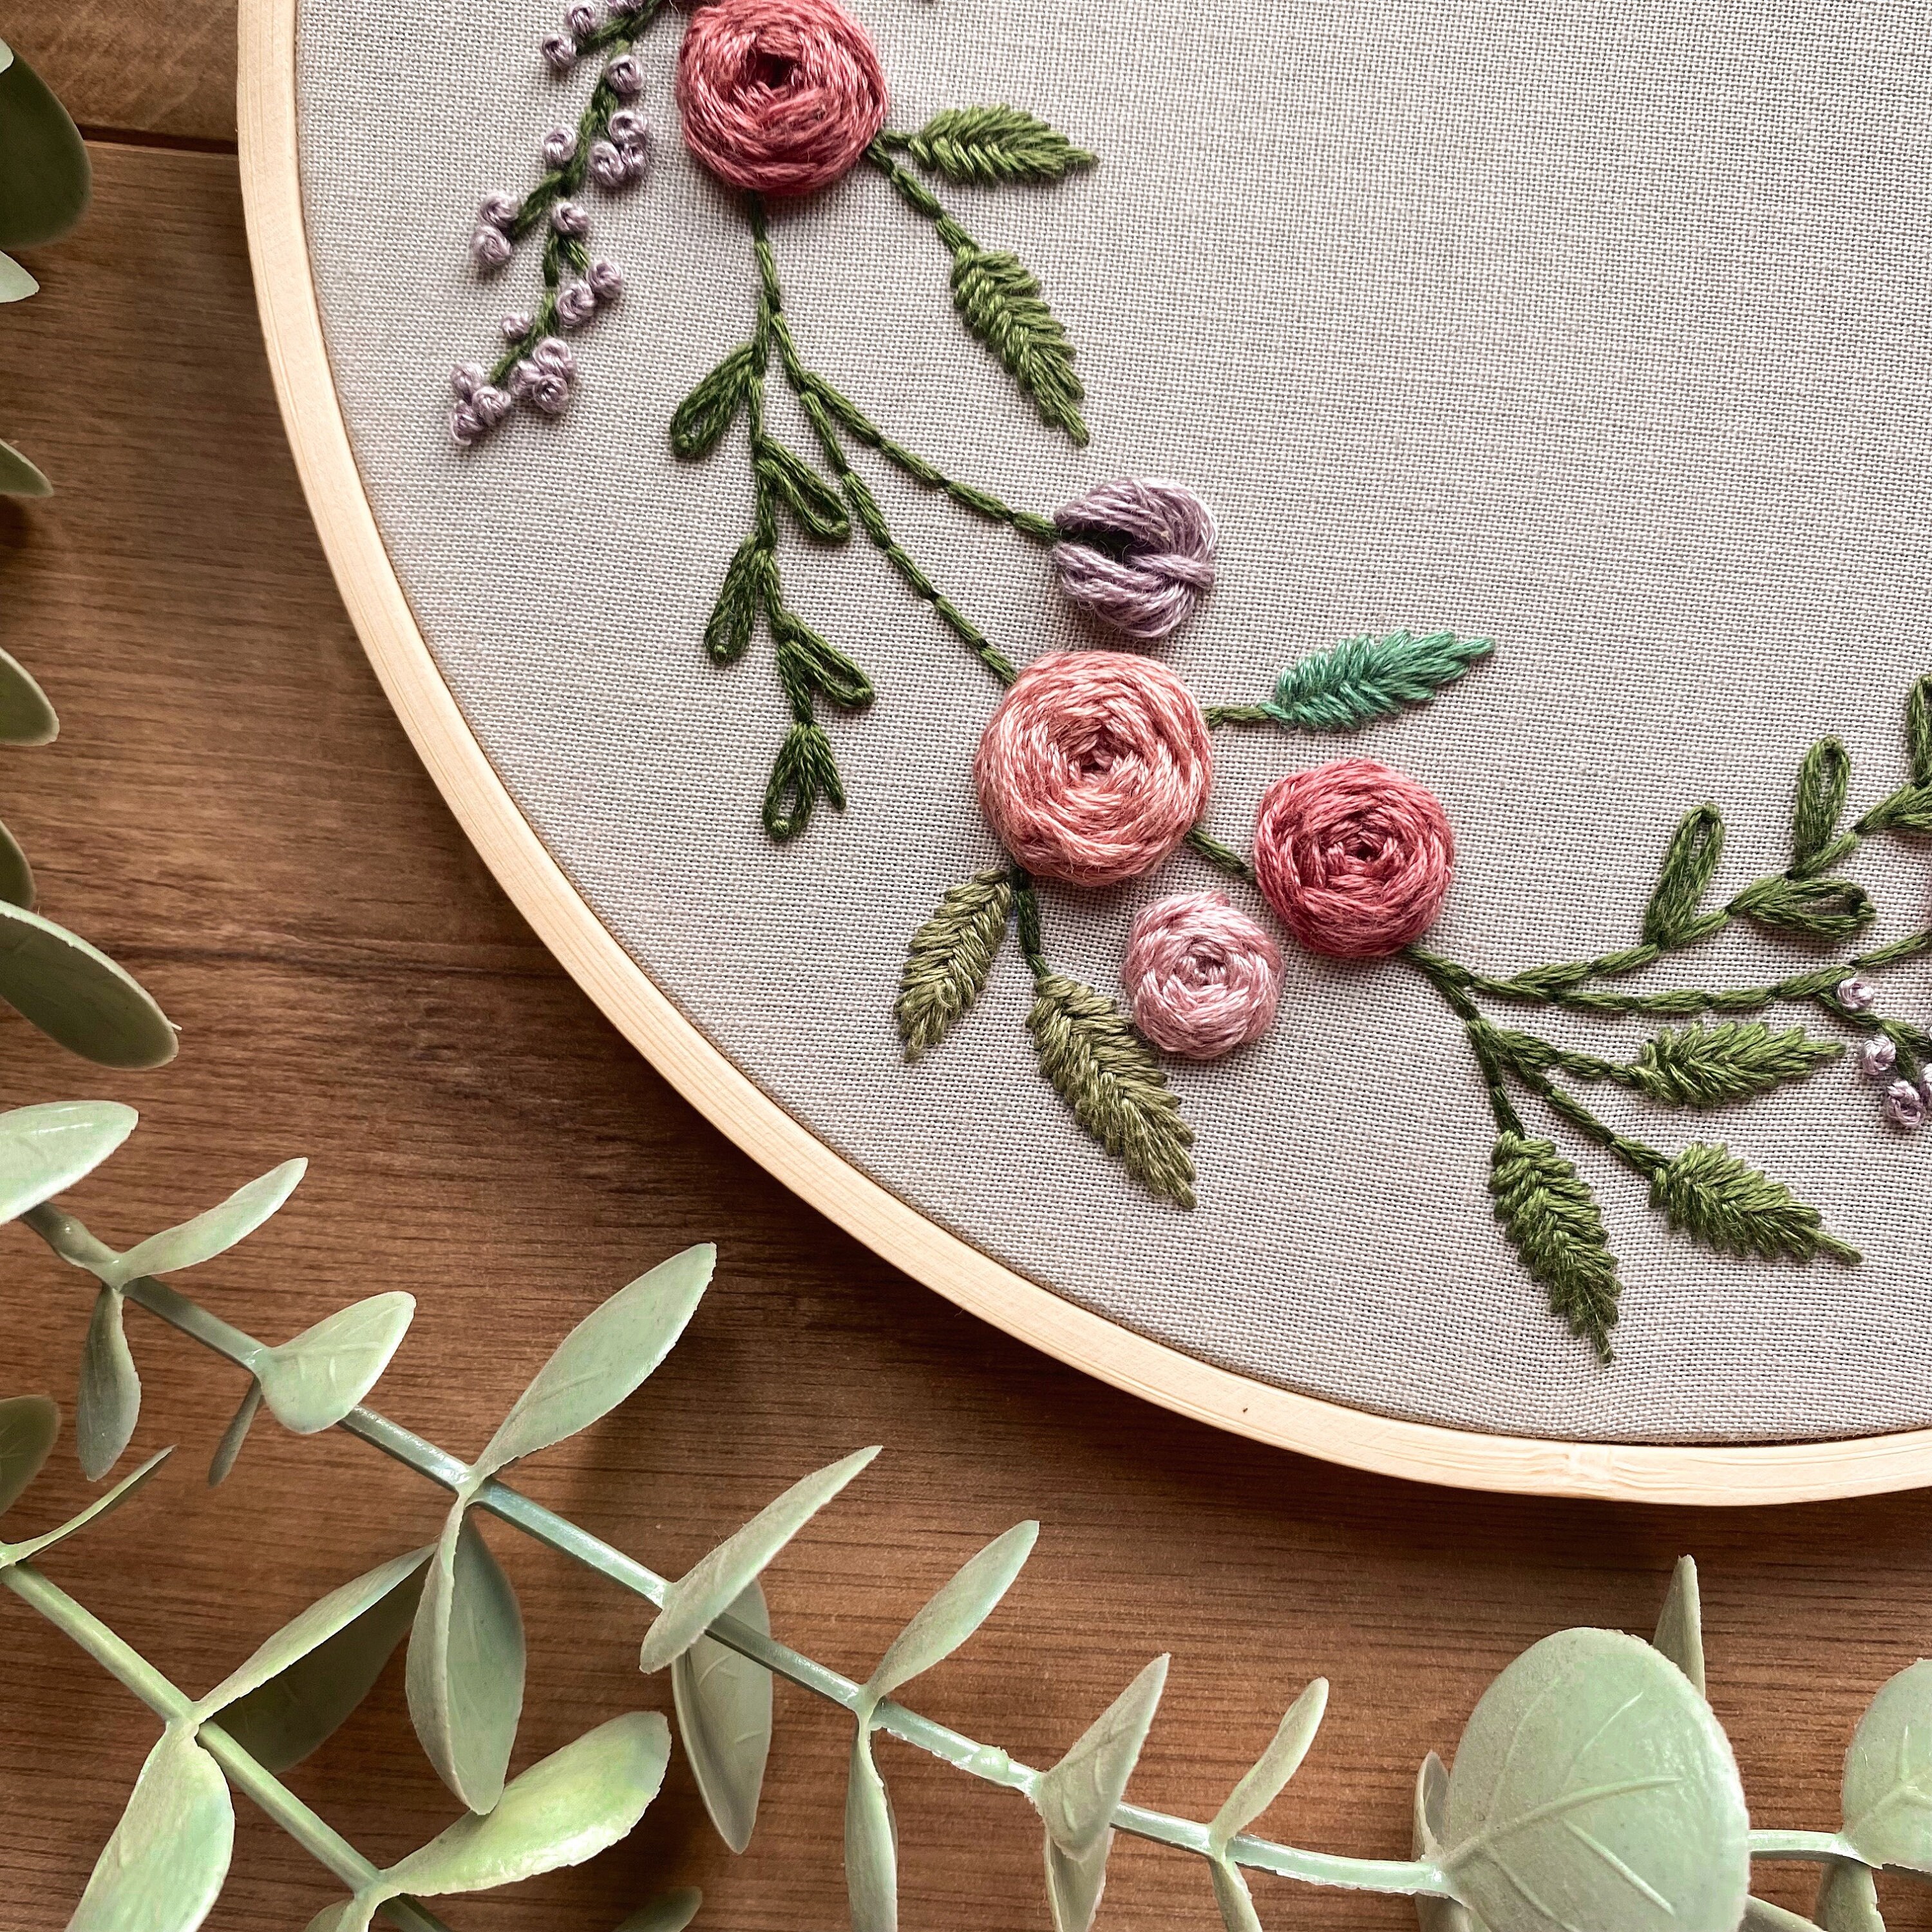 Floral Wreath Embroidery Pattern, Hoop Art Flowers, Embroidery Gift Idea,  PDF Design, Modern Home Decor DIY, Embr…